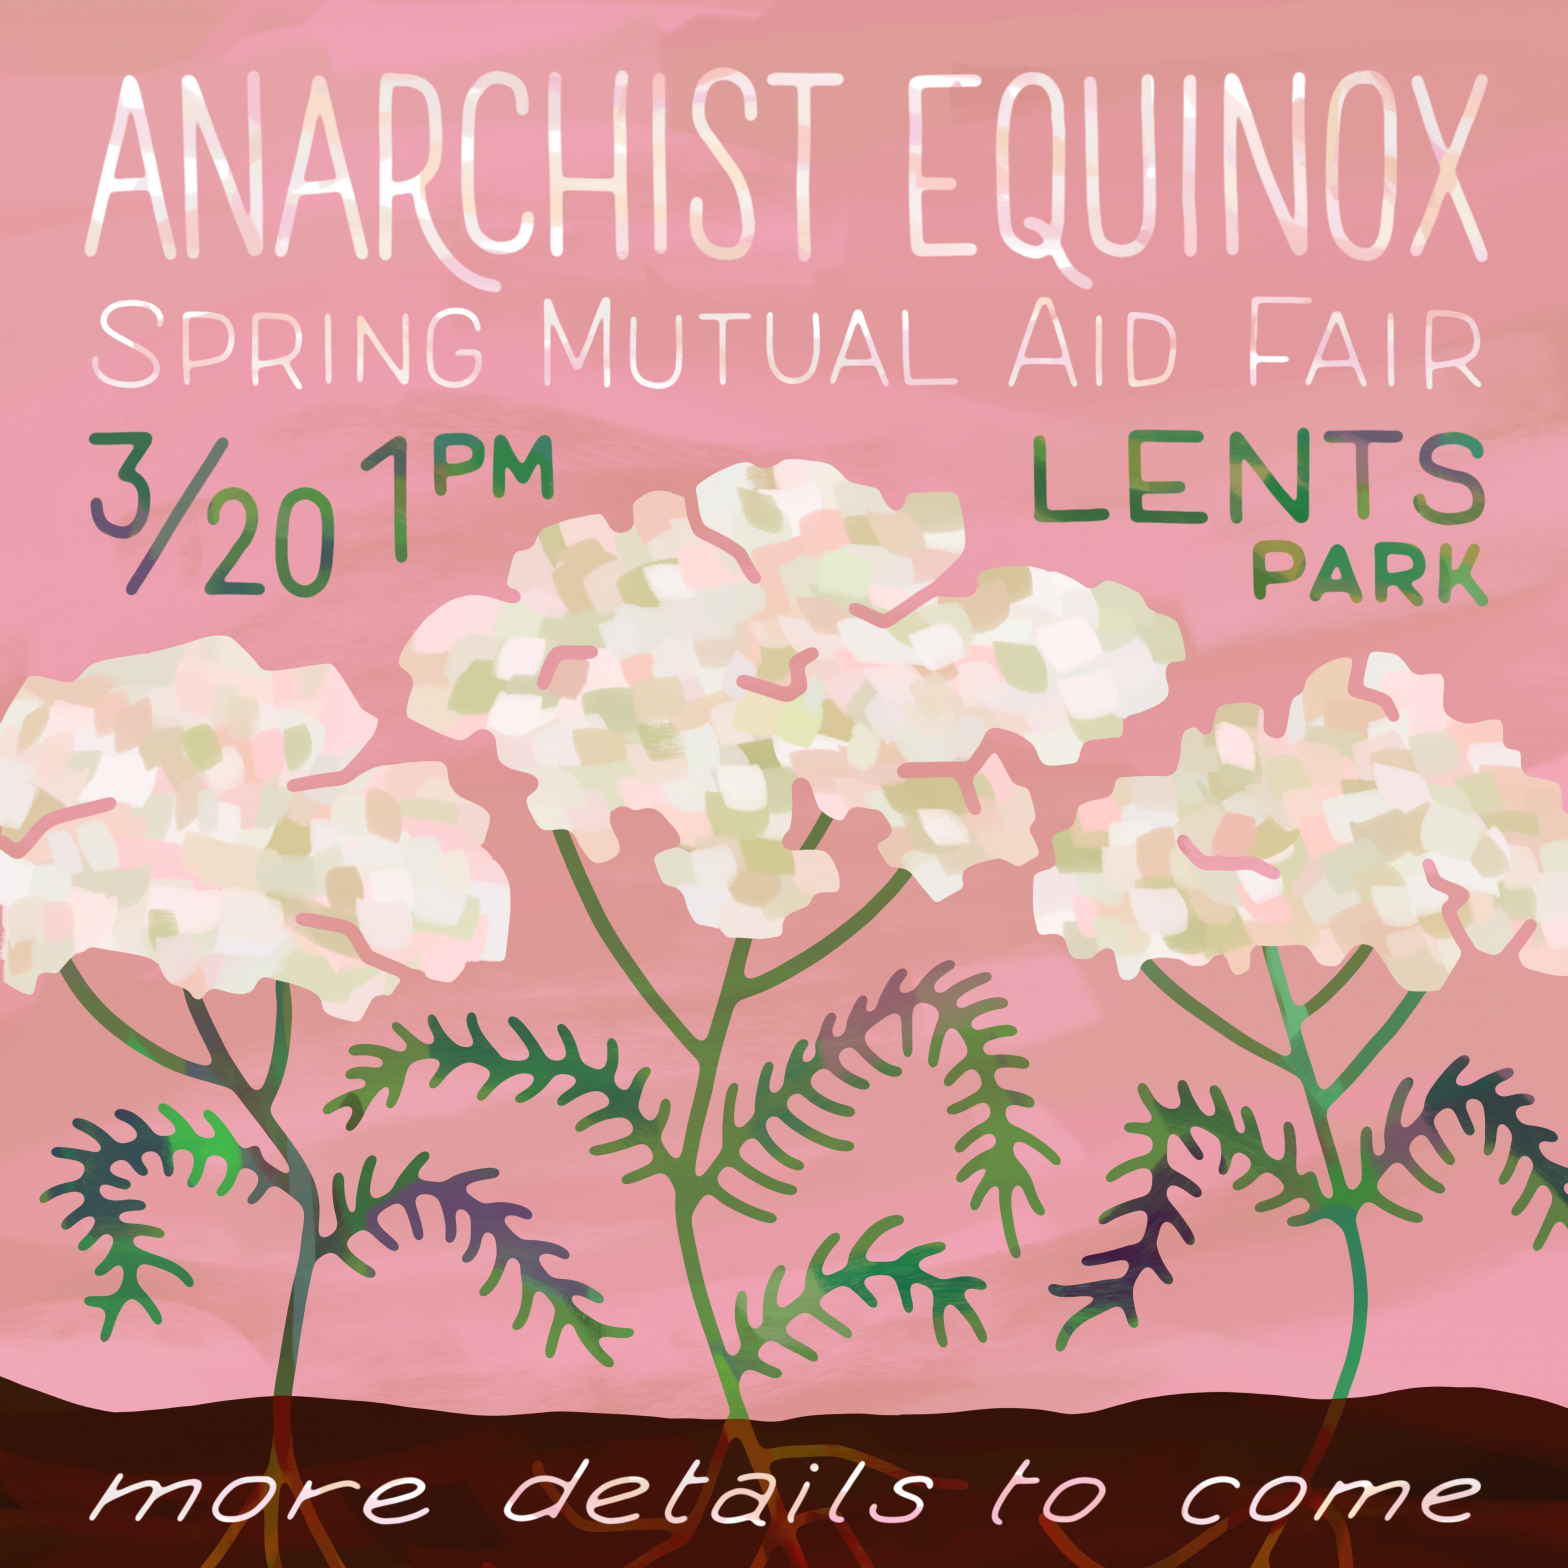 Flyer reads: Anarchist equinox spring mutual aid fair. 3/20 1 PM. Lents Park. more details to come